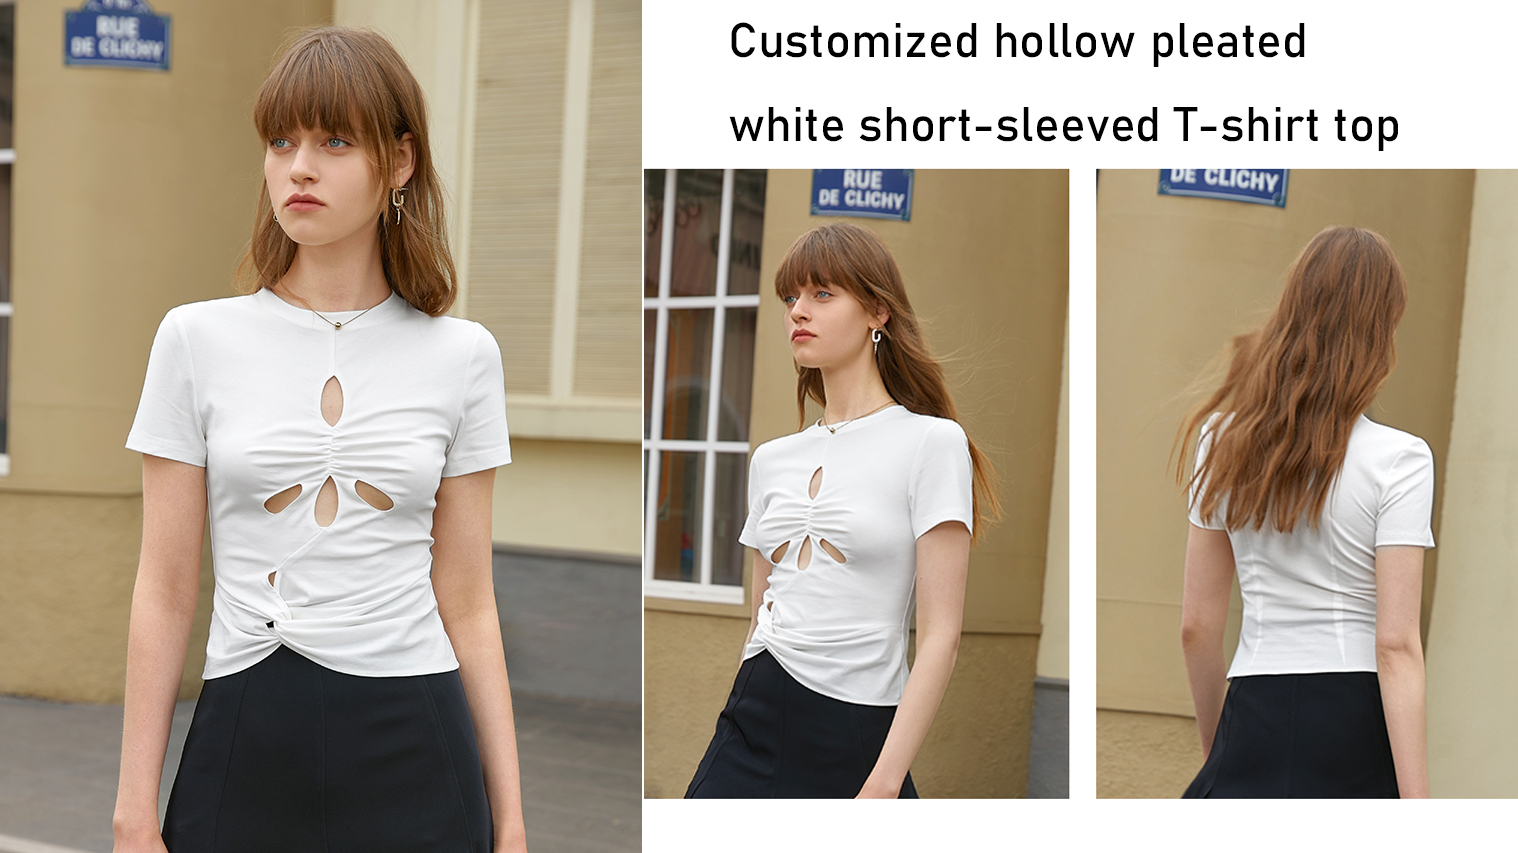 Customized hollow pleated white short-sleeved T-shirt top